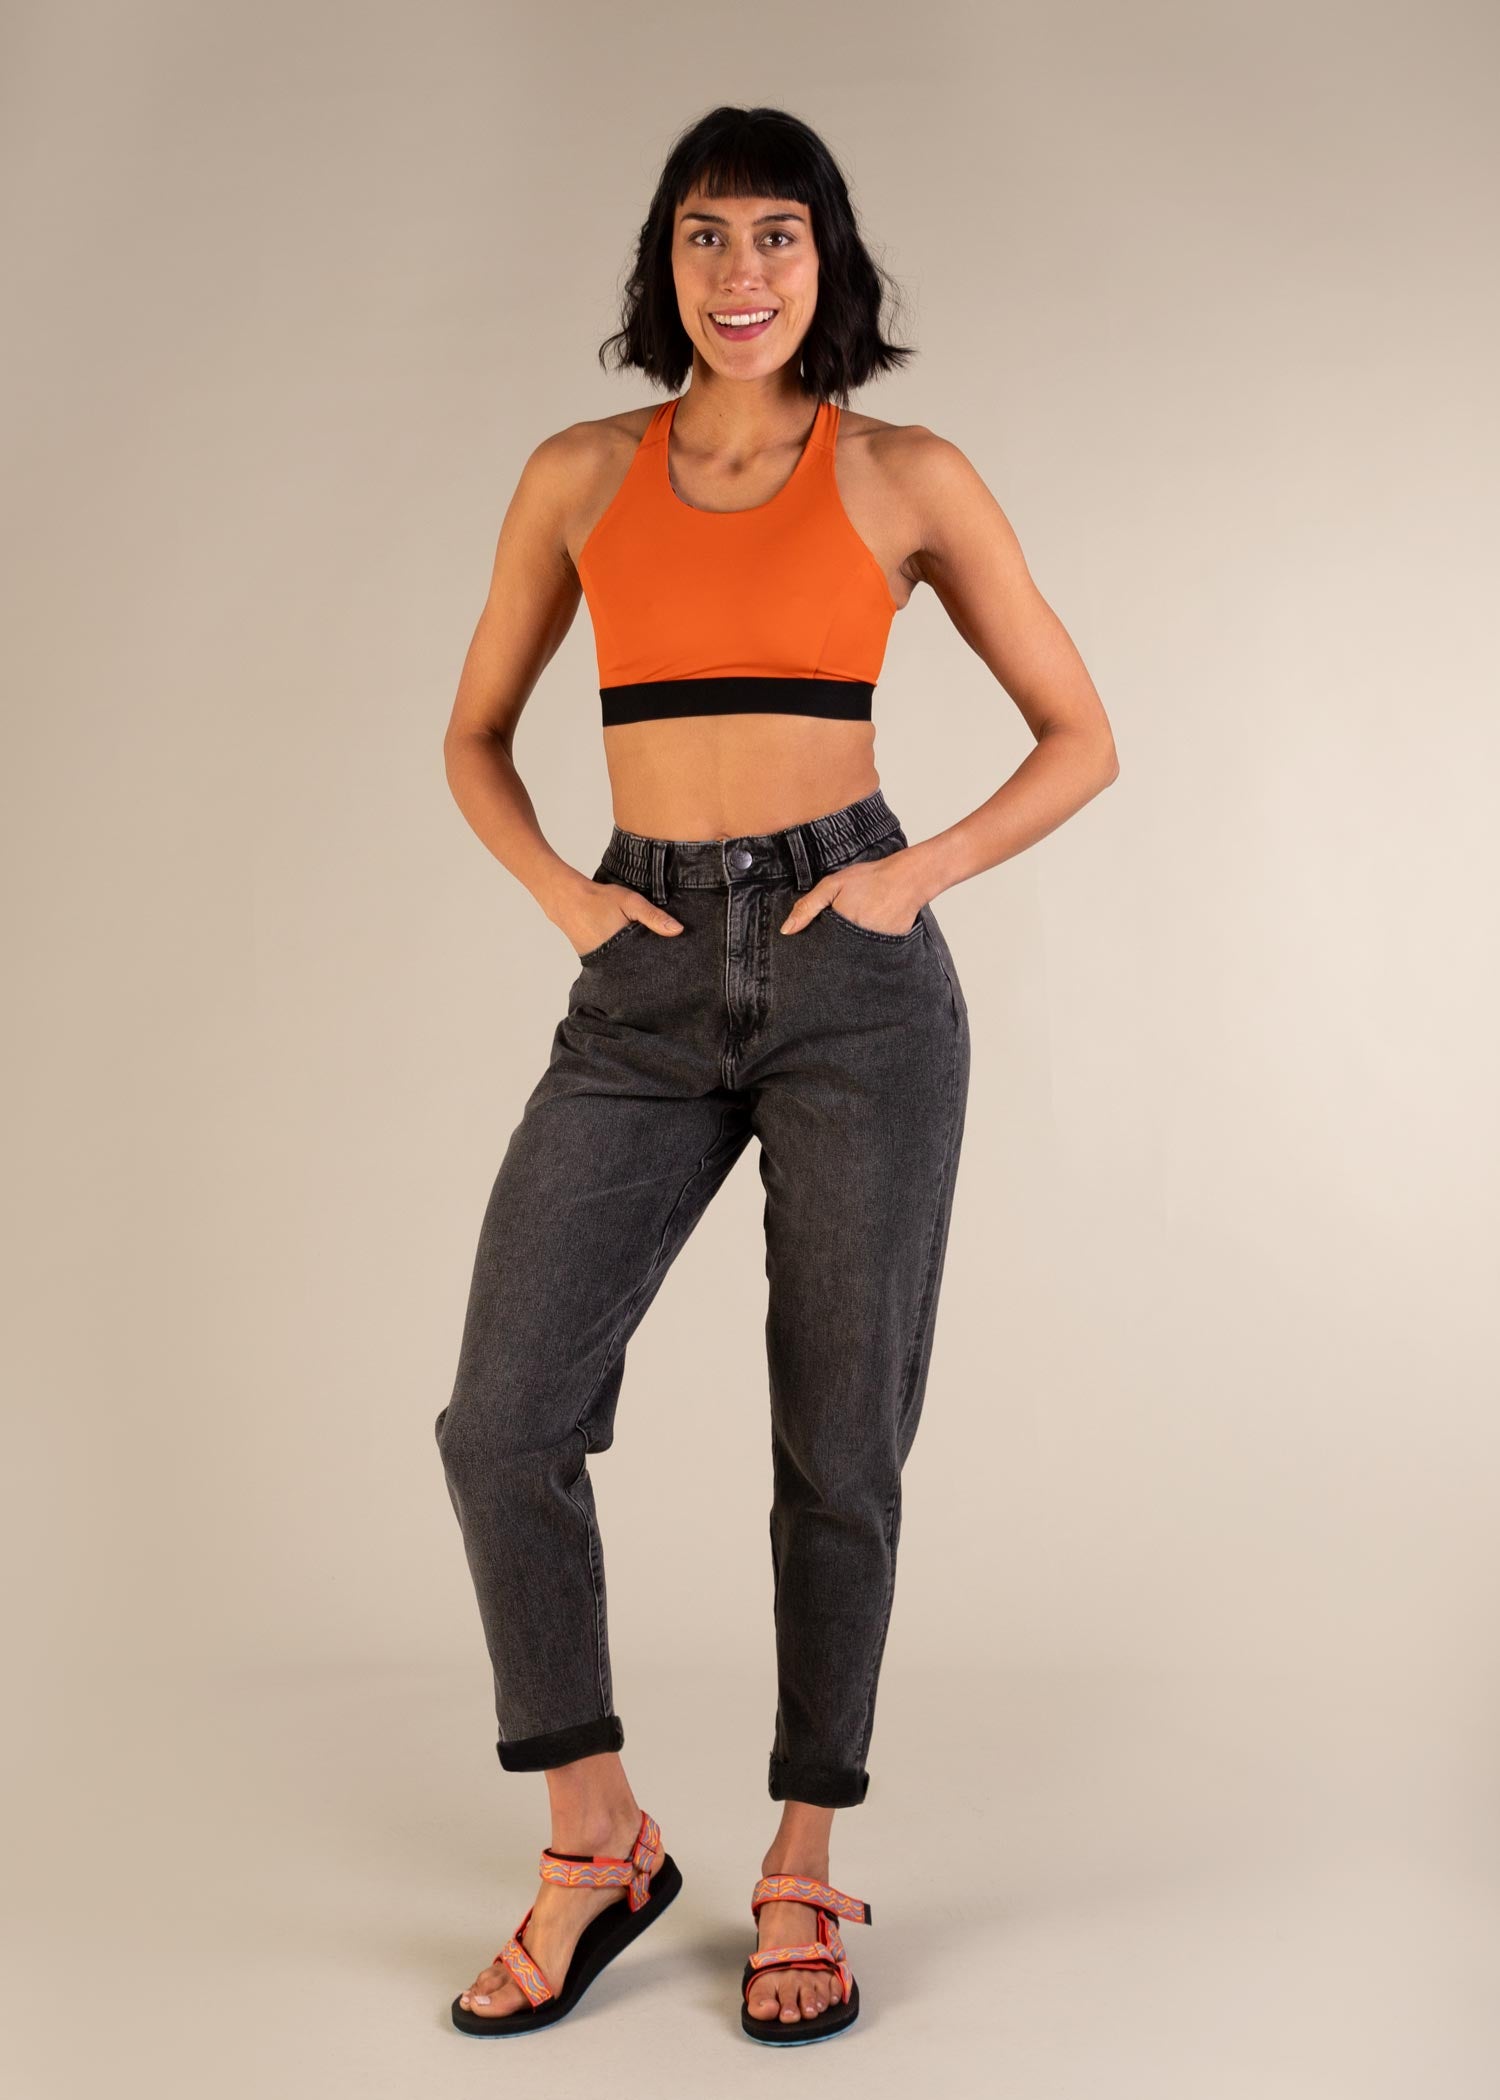 3RD ROCK Sustainable stretchy Denim Jeans - Natasha is 5ft 9" with a 25" waist, and is wearing a 28 RL. F